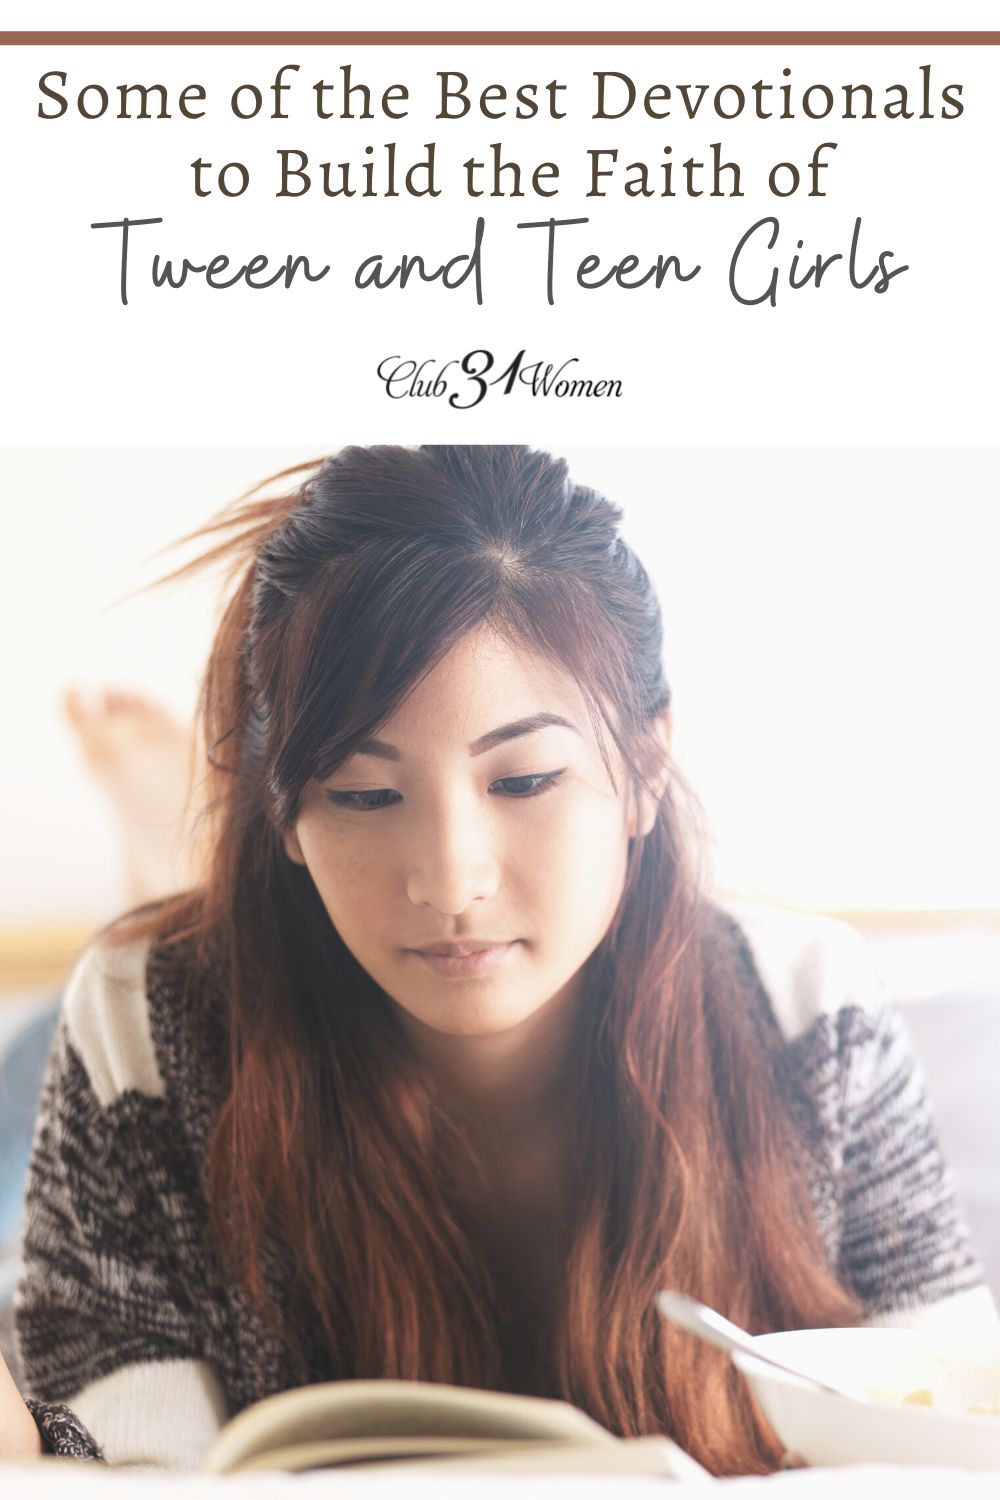 Finding age appropriate devotionals can be like looking for a needle in a haystack. We've compiled a list of tween and teen girls devotionals to help you! via @Club31Women